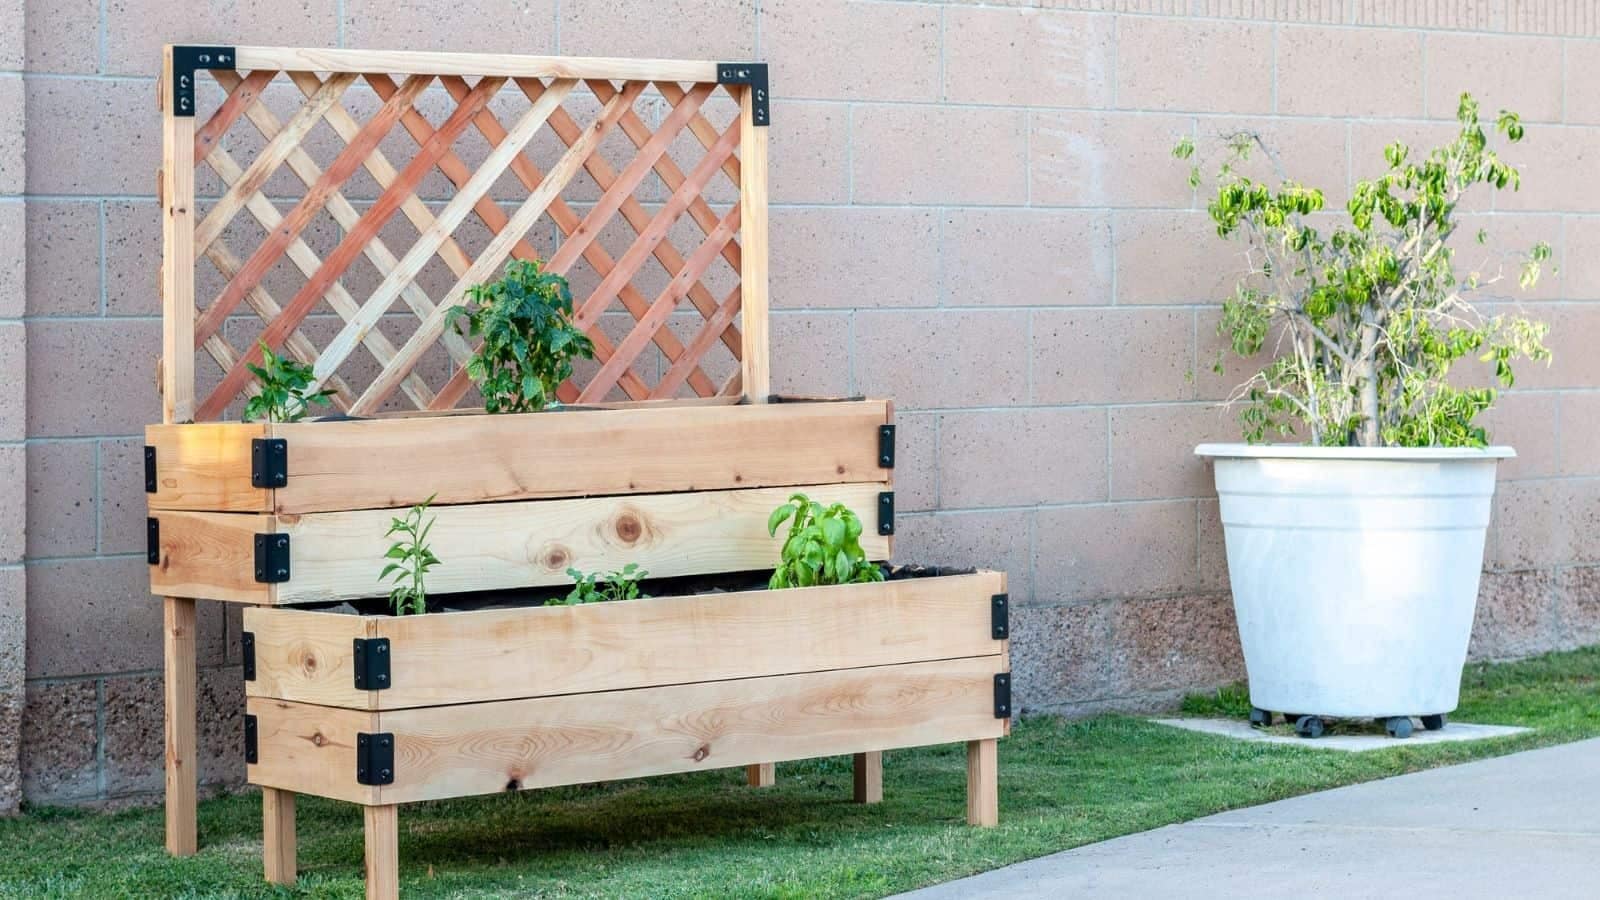 <p>Raised garden beds have become very popular over the last few years. This may look like a huge project, but it’s simple to make with a Kreg jig and screws. You can have your garden anywhere, perfect for a small backyard, patio, or deck. <a href="https://www.anikasdiylife.com/diy-tiered-raised-garden-bed/">See how to build it here.</a></p>